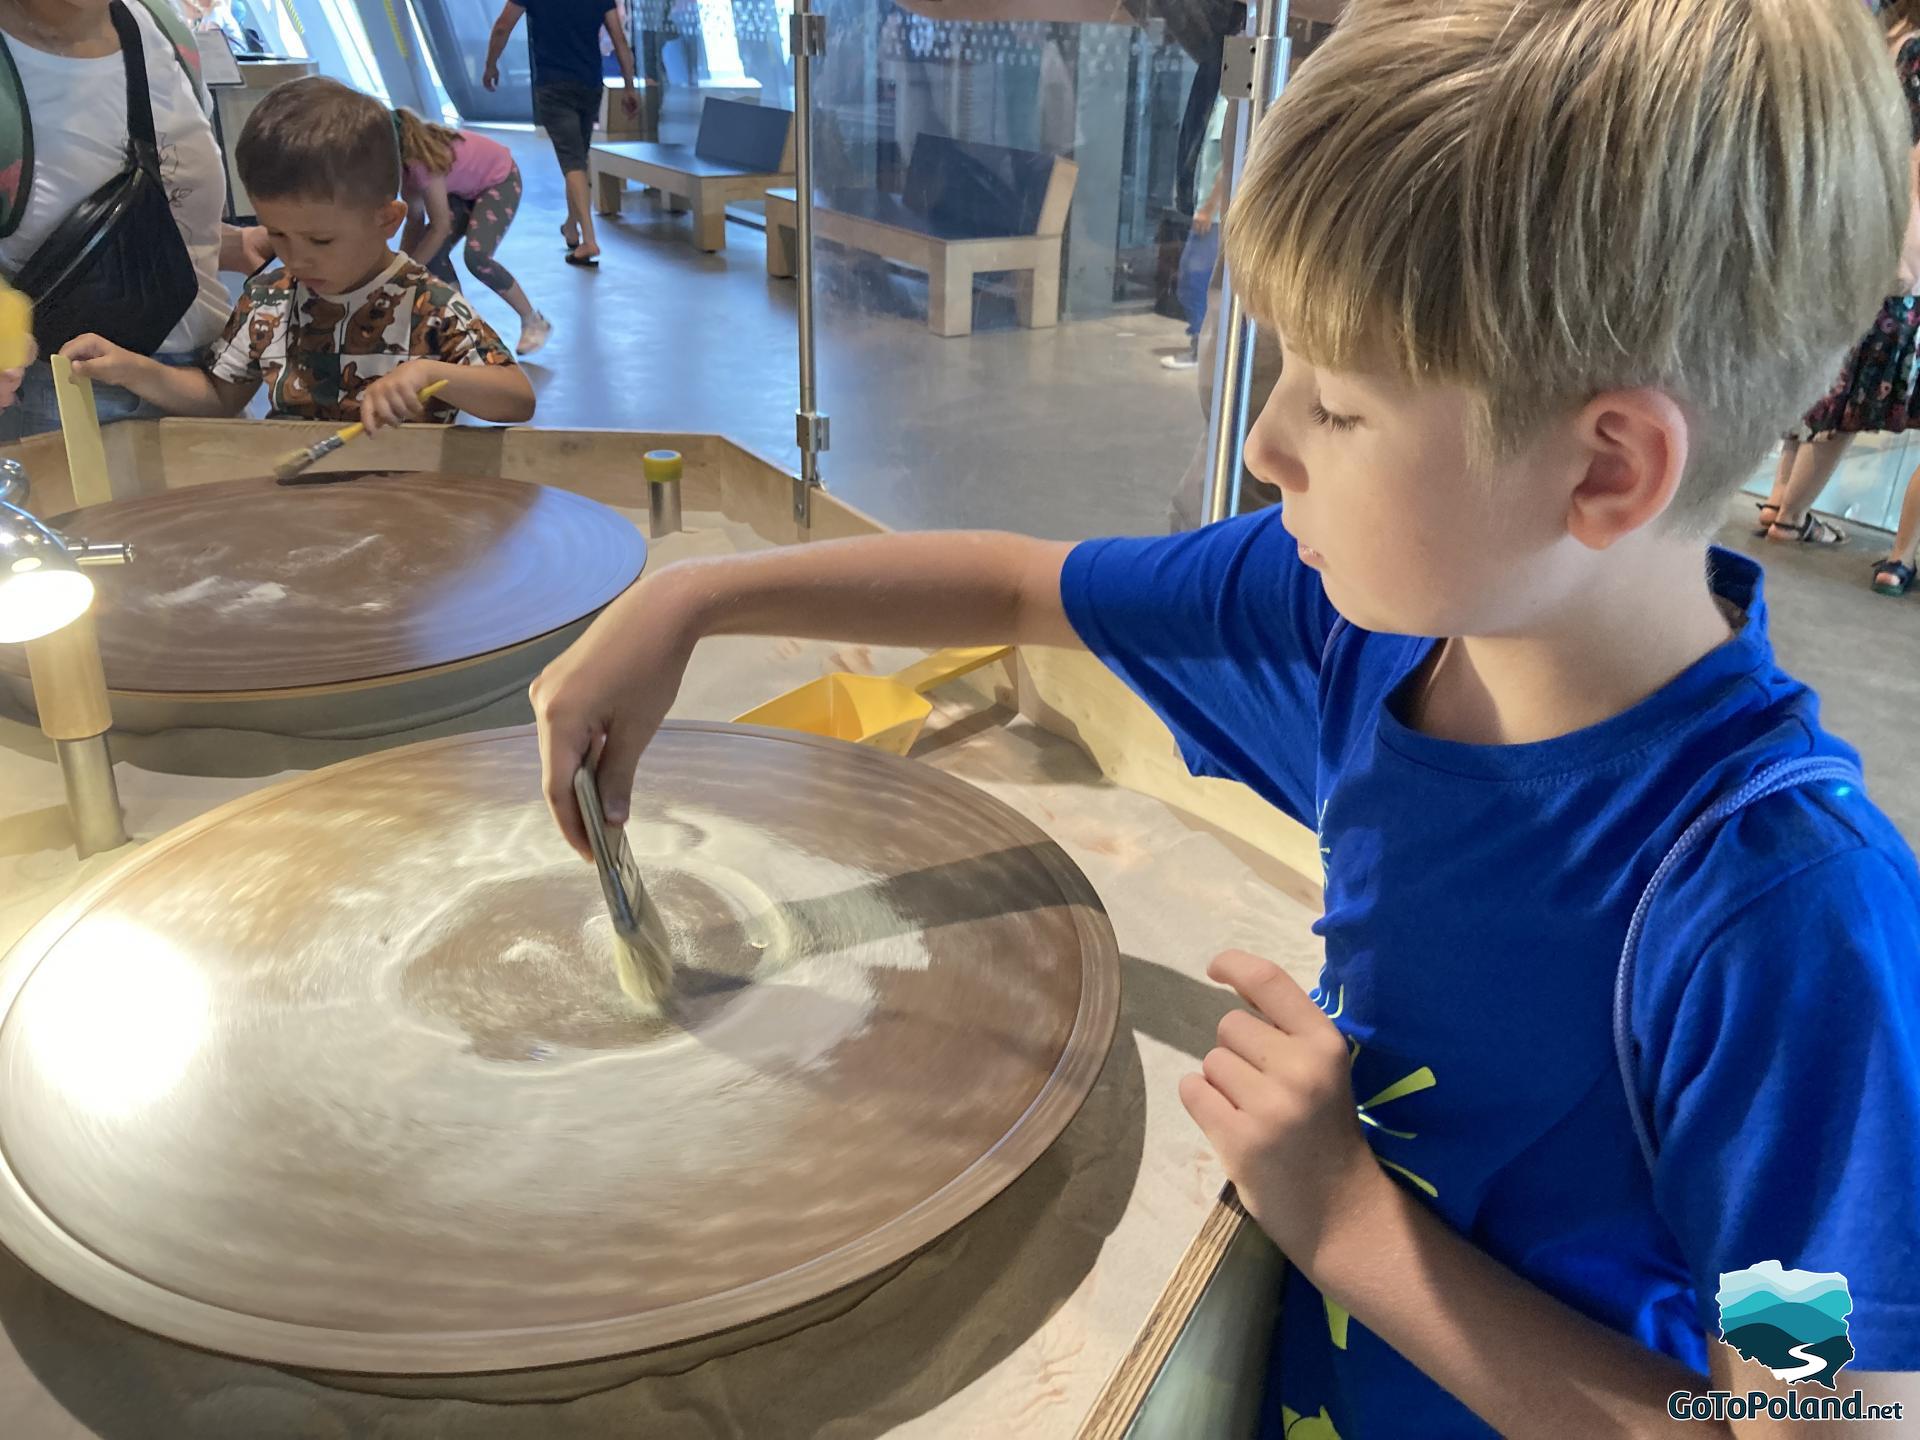 a boy is playing with sand and a wheel in the science centre